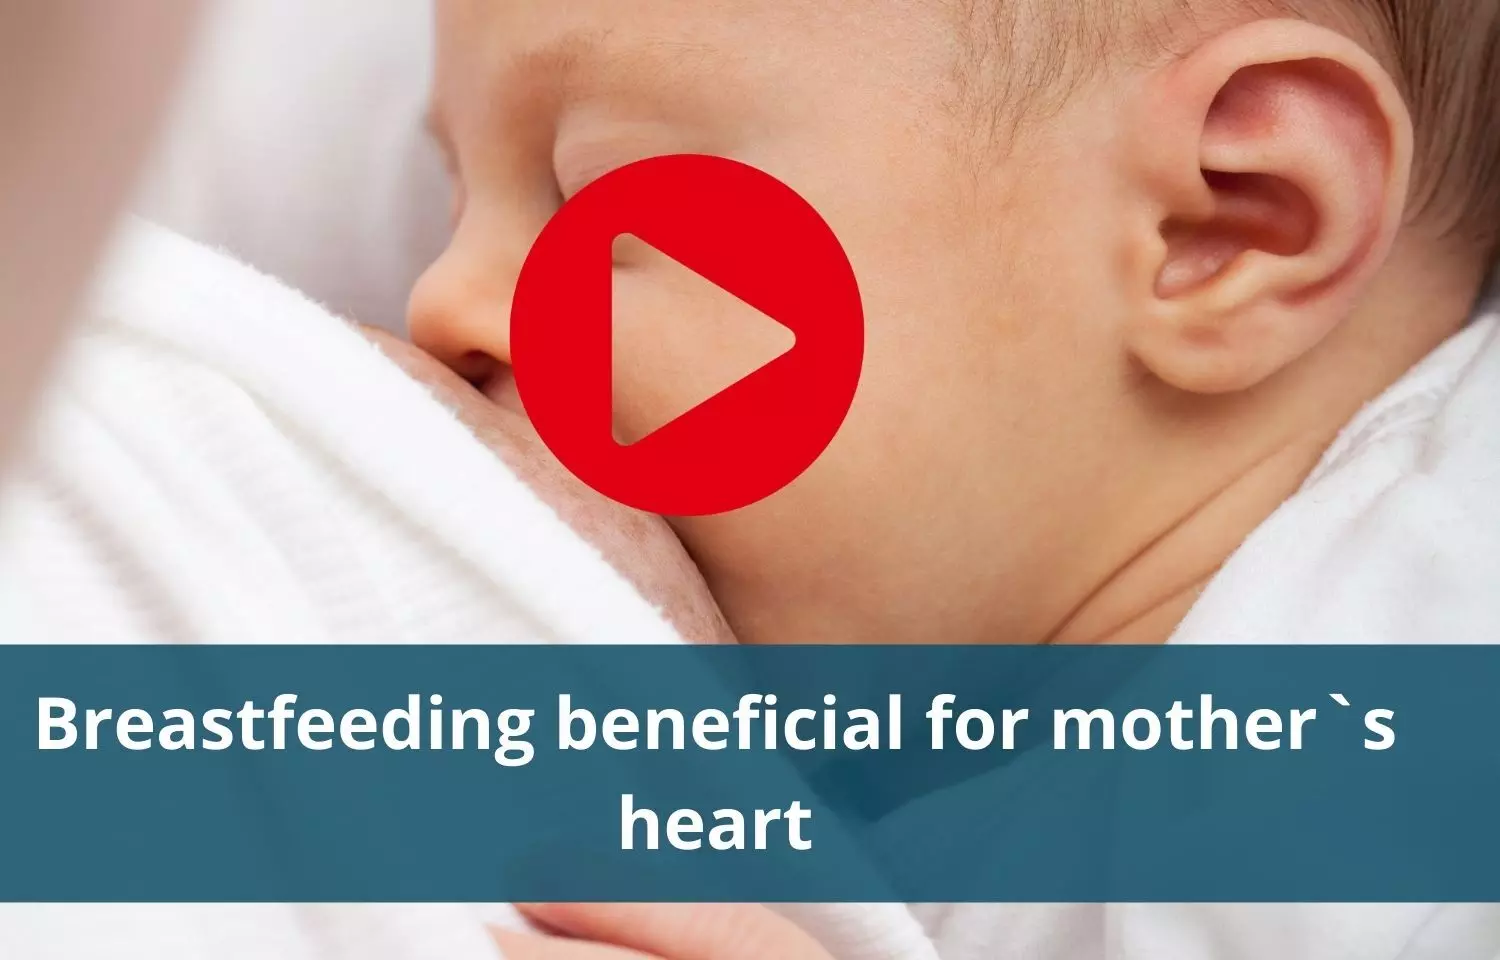 Breastfeeding to help in maintaining good heart health in mothers